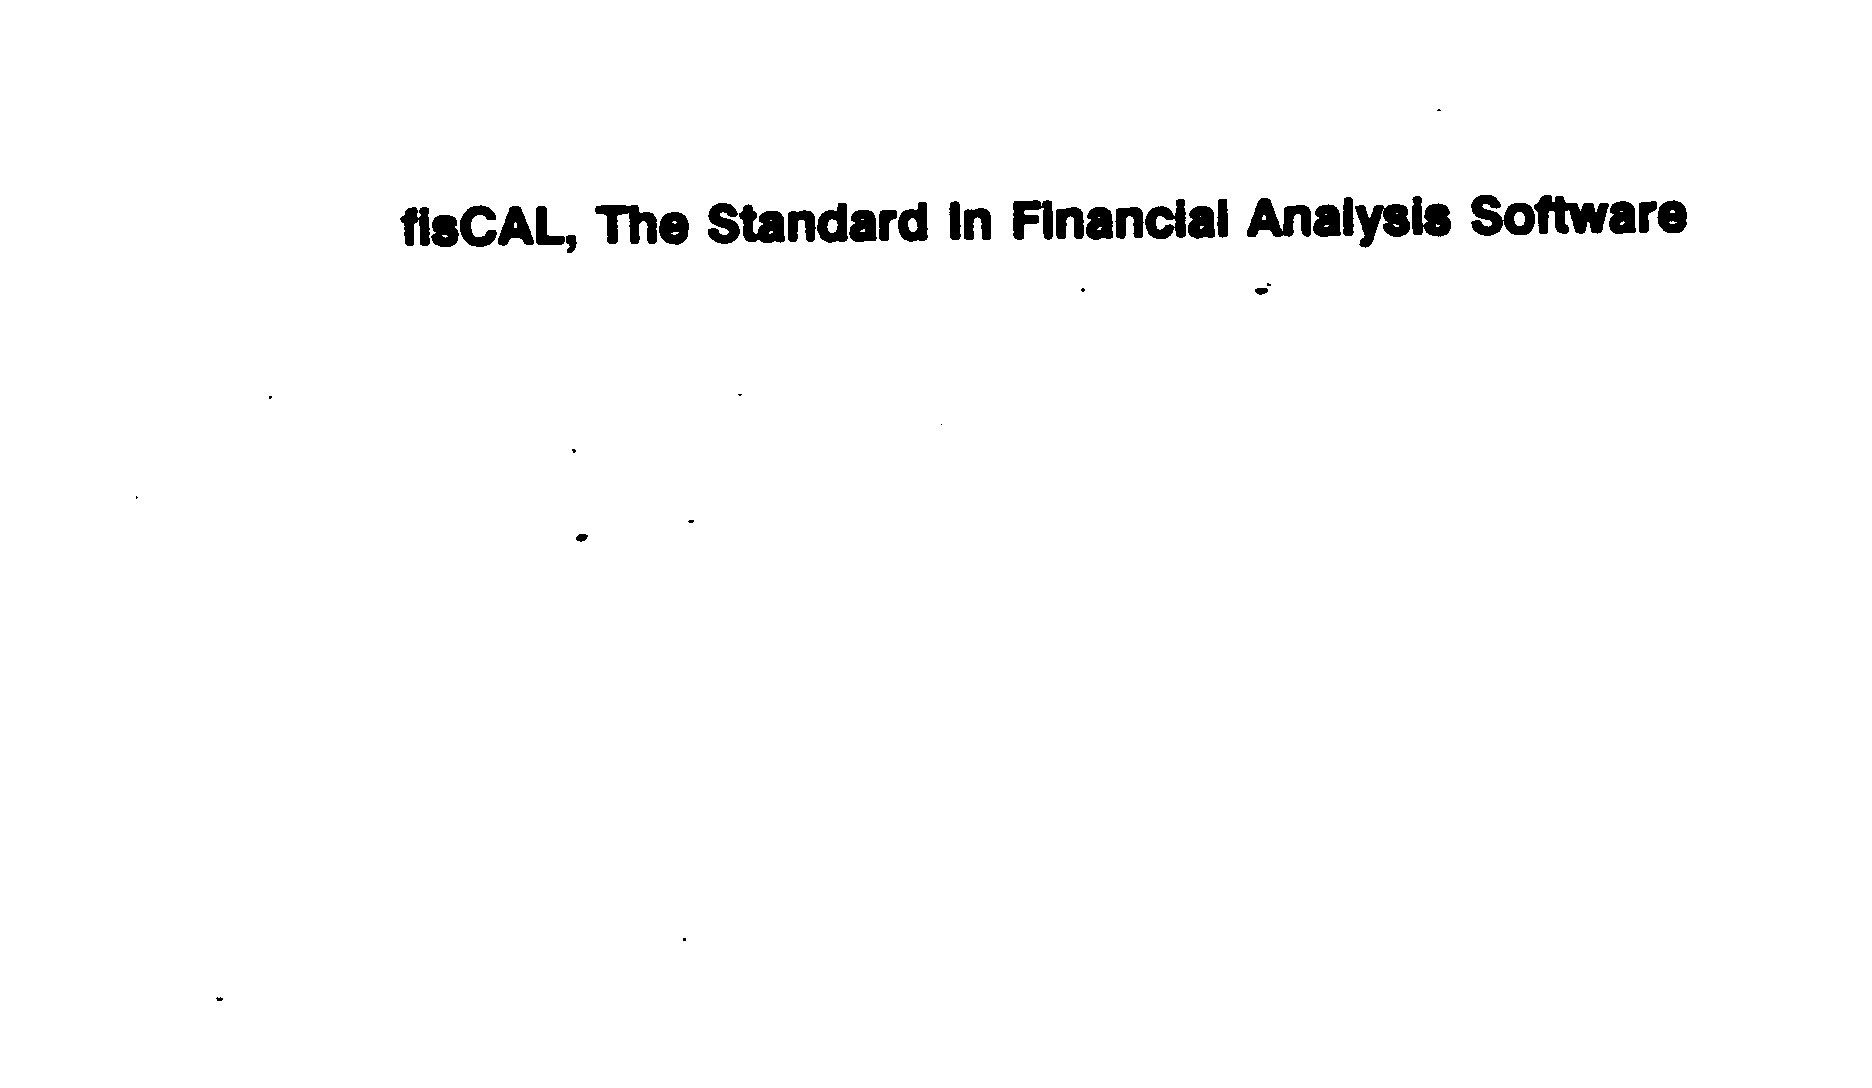  FISCAL, THE STANDARD IN FINANCIAL ANALYSIS SOFTWARE